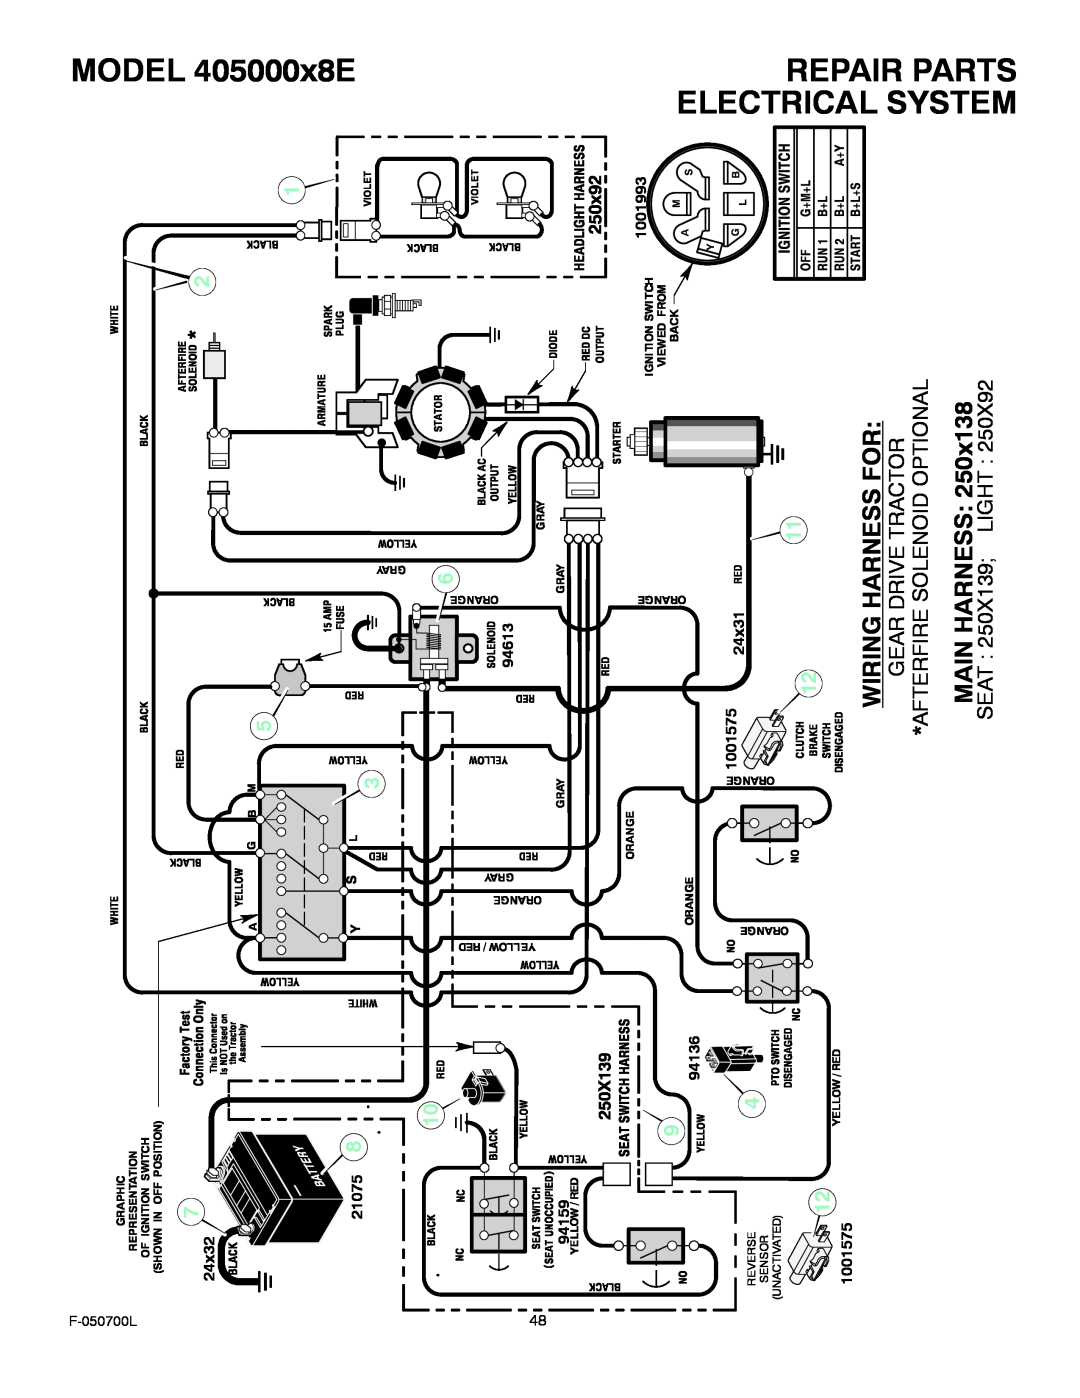 Murray manual MODEL 405000x8E, Wiring Harness For, Main Harness, 1211, Electrical System, Repair Parts 